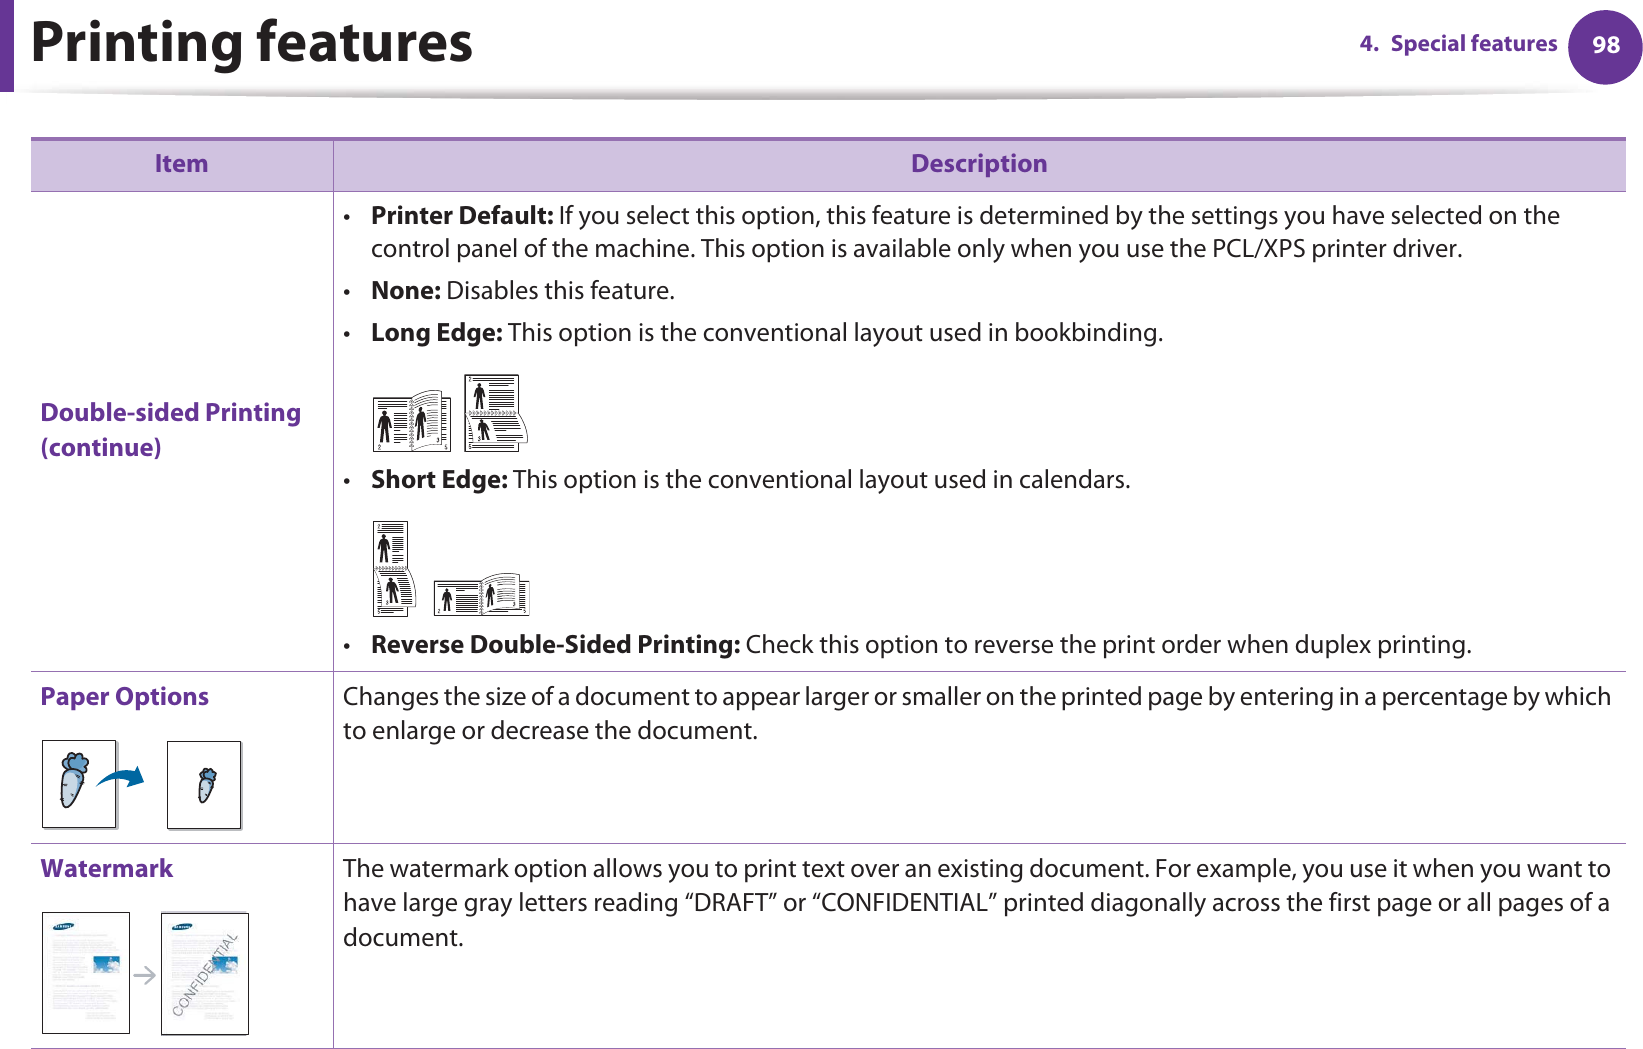 Printing features 984. Special featuresDouble-sided Printing (continue)•Printer Default: If you select this option, this feature is determined by the settings you have selected on the control panel of the machine. This option is available only when you use the PCL/XPS printer driver.•None: Disables this feature.•Long Edge: This option is the conventional layout used in bookbinding.•Short Edge: This option is the conventional layout used in calendars.•Reverse Double-Sided Printing: Check this option to reverse the print order when duplex printing.Paper Options Changes the size of a document to appear larger or smaller on the printed page by entering in a percentage by which to enlarge or decrease the document.Watermark The watermark option allows you to print text over an existing document. For example, you use it when you want to have large gray letters reading “DRAFT” or “CONFIDENTIAL” printed diagonally across the first page or all pages of a document. Item Description